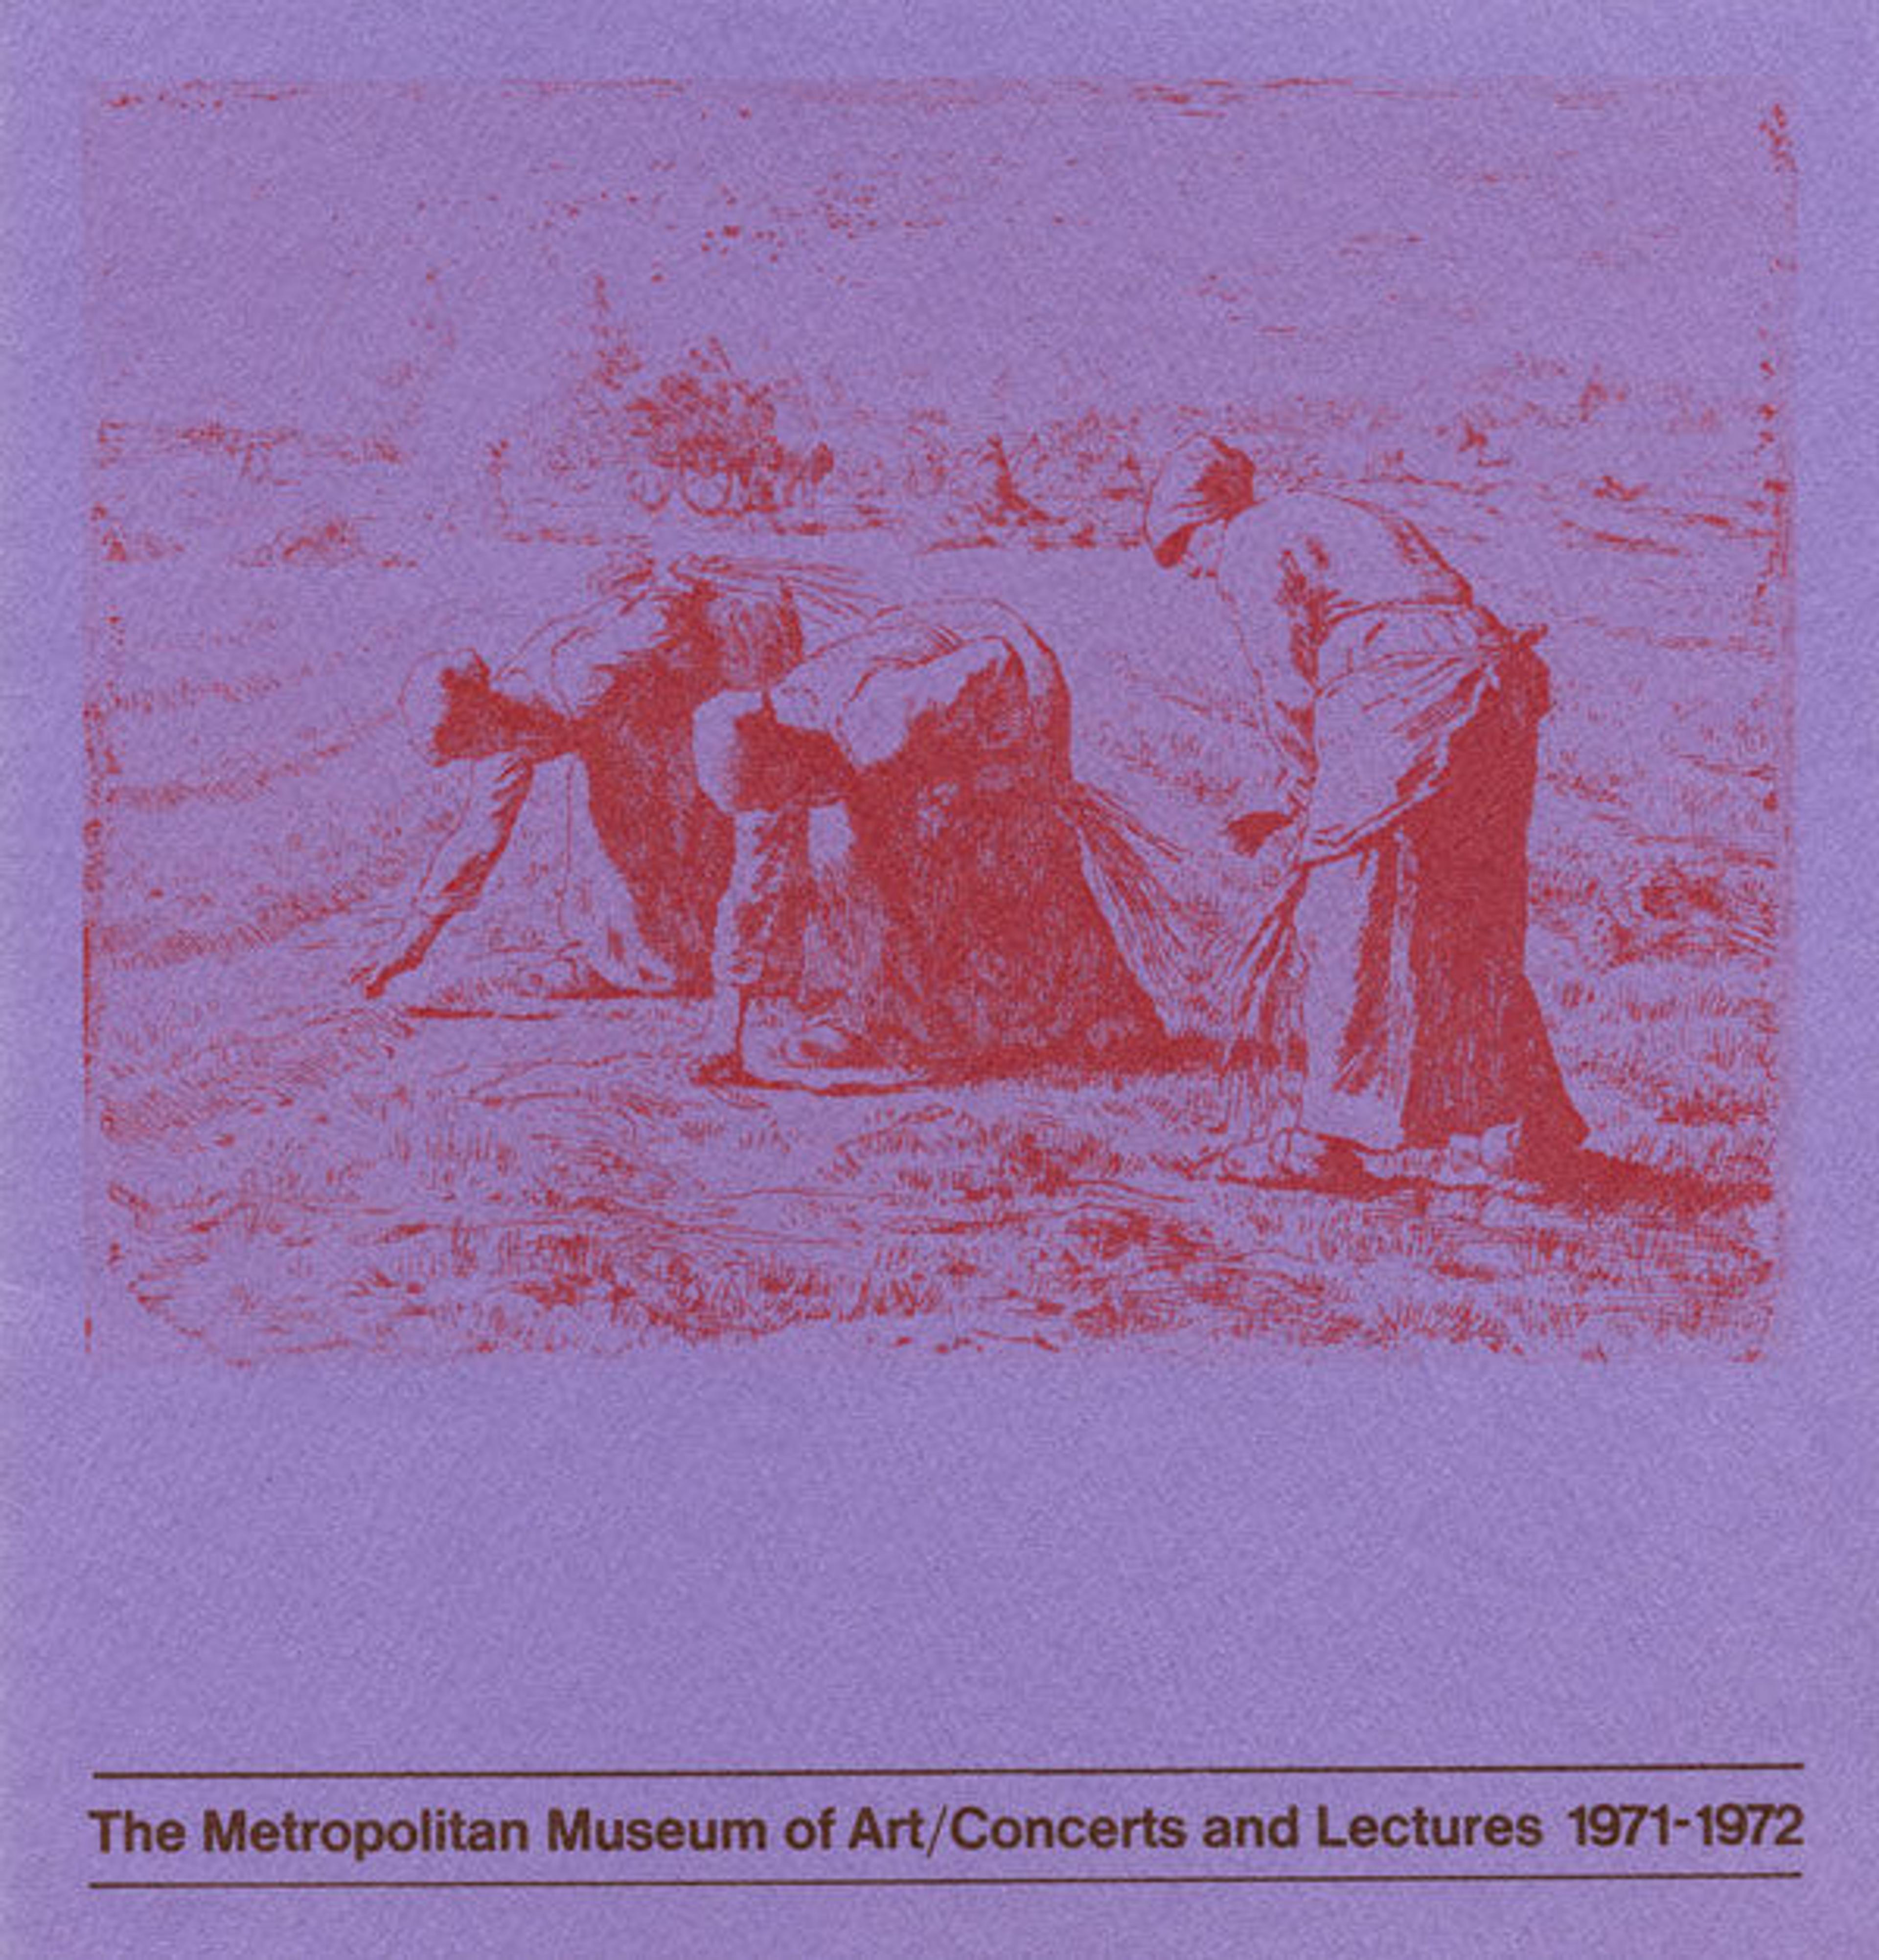 Brochure cover for the 1971–72 season of Concerts & Lectures, featuring figures from an etching of Jean-François Millet's The Gleaners